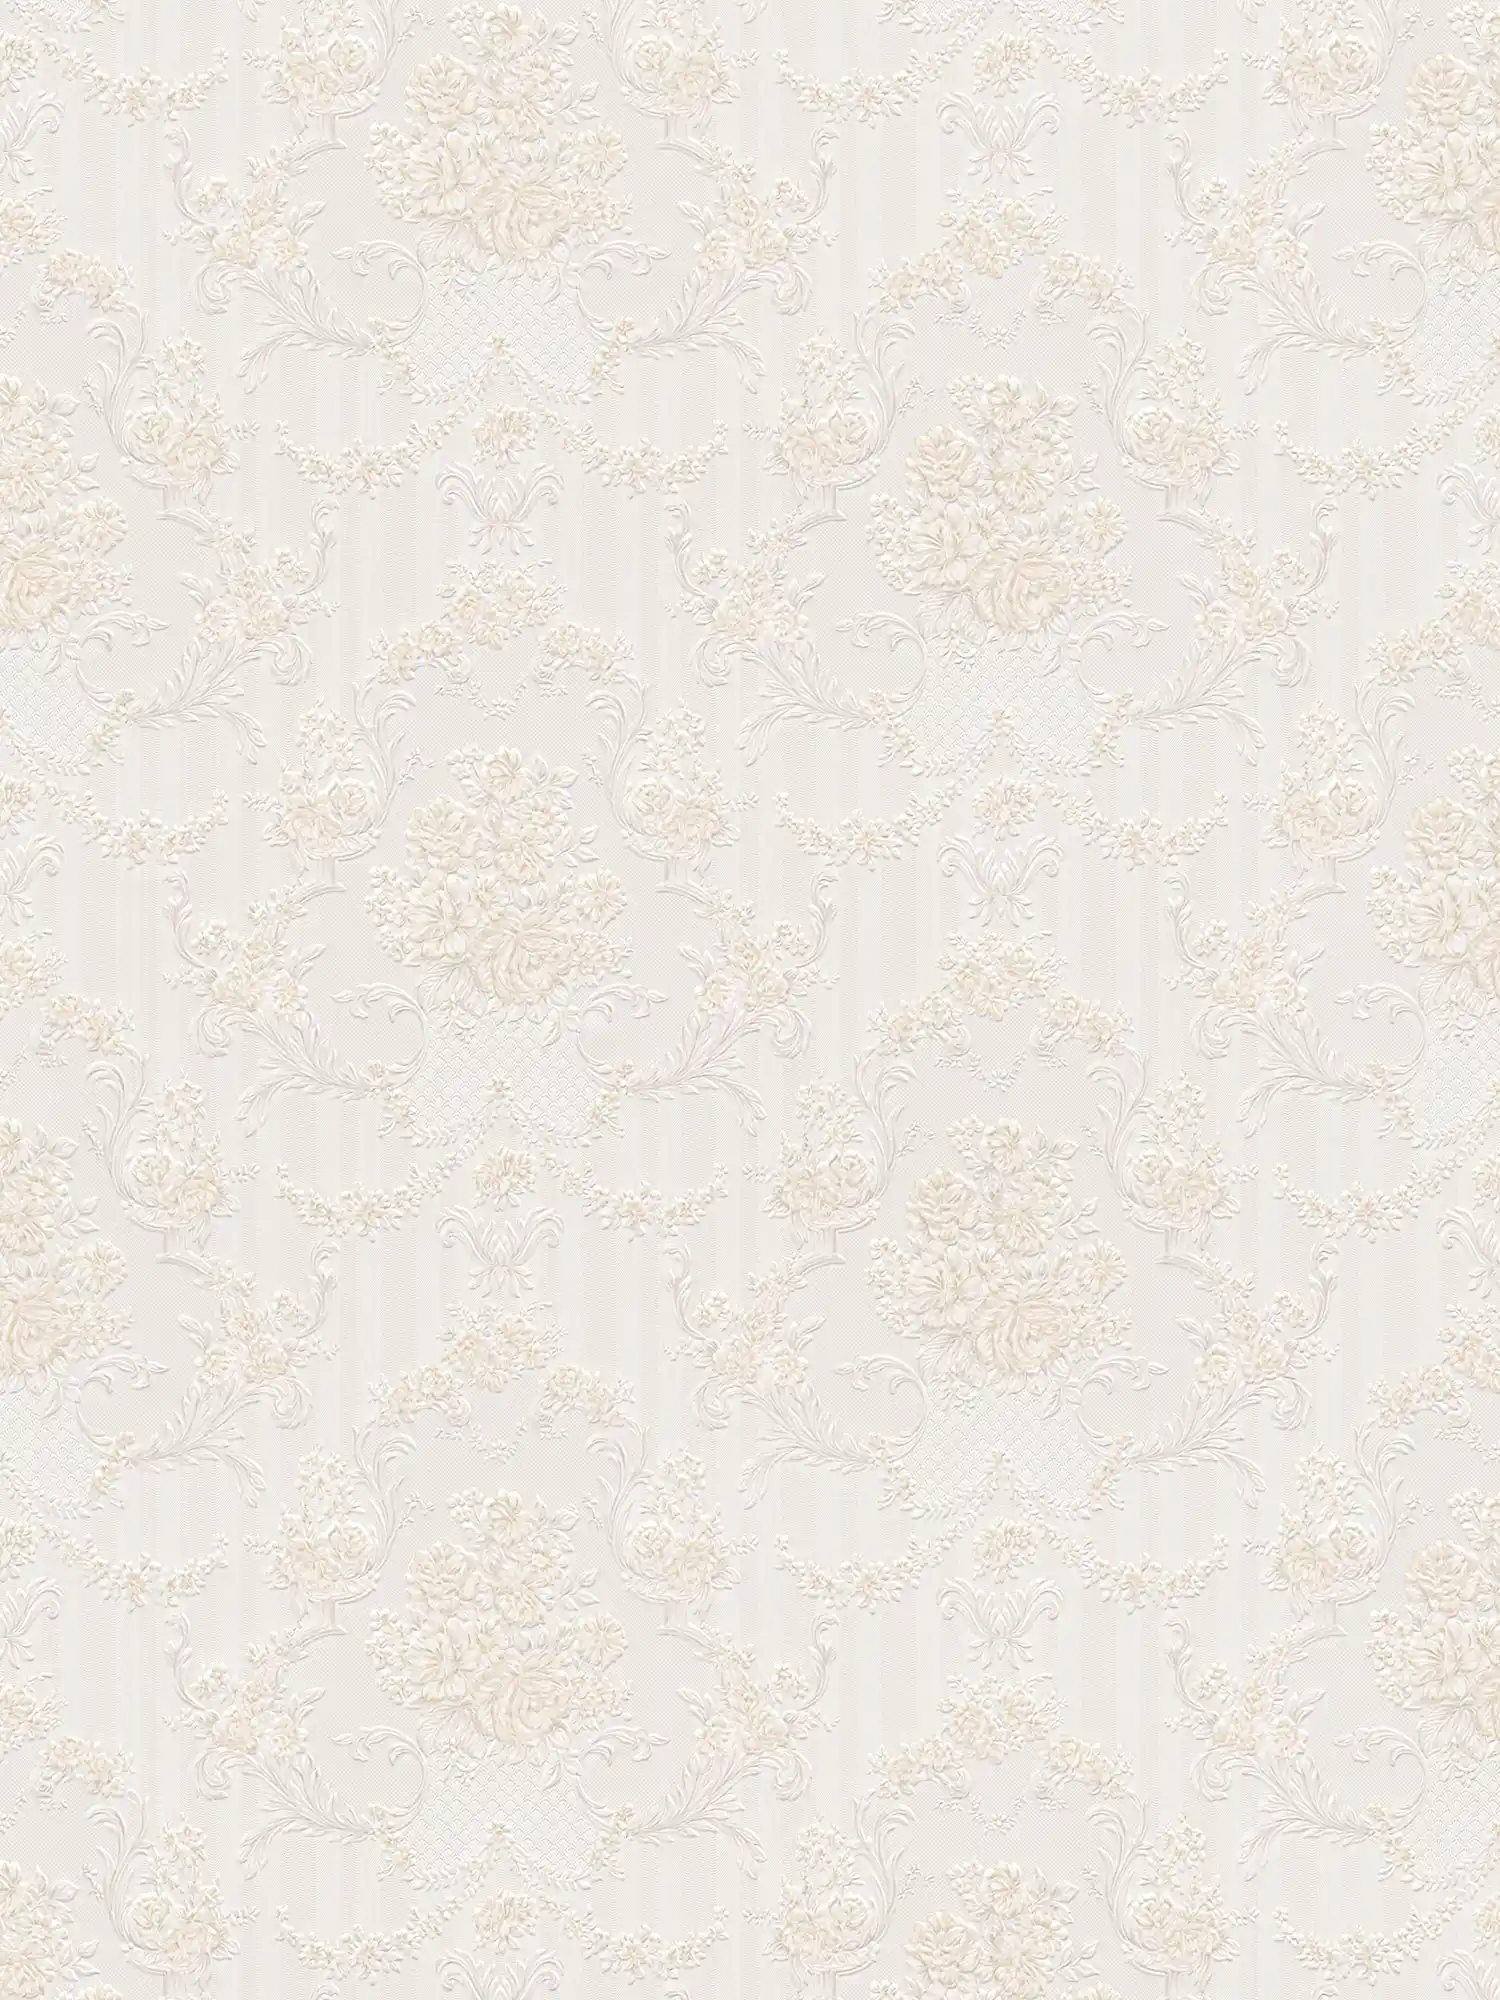 Neo baroque Wallpaper with roses ornaments & stripes - beige
